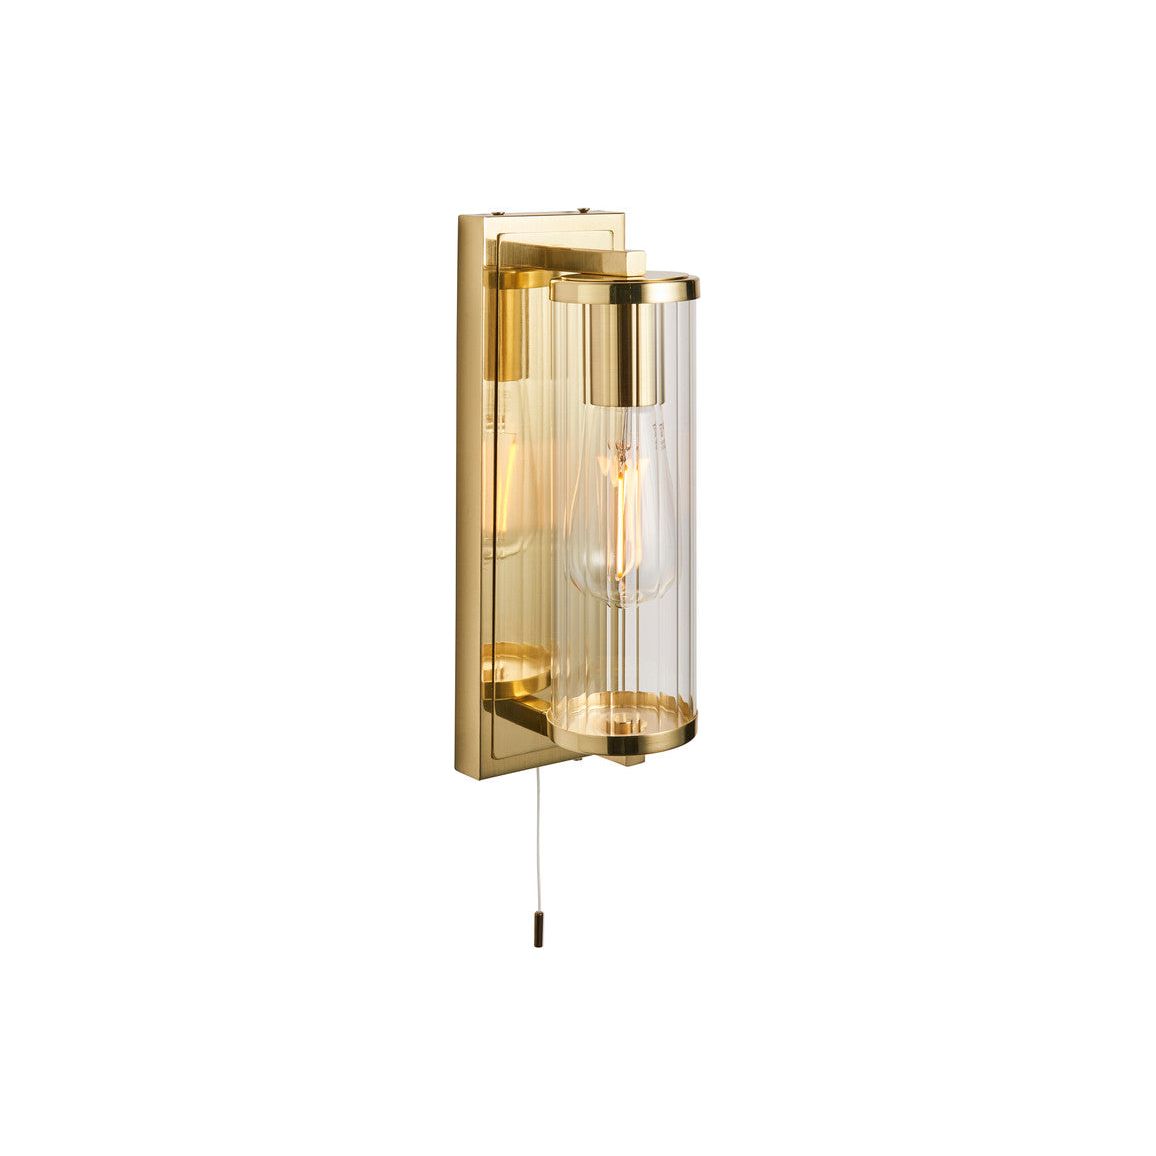 Lawrence Wall Light - Brushed Brass